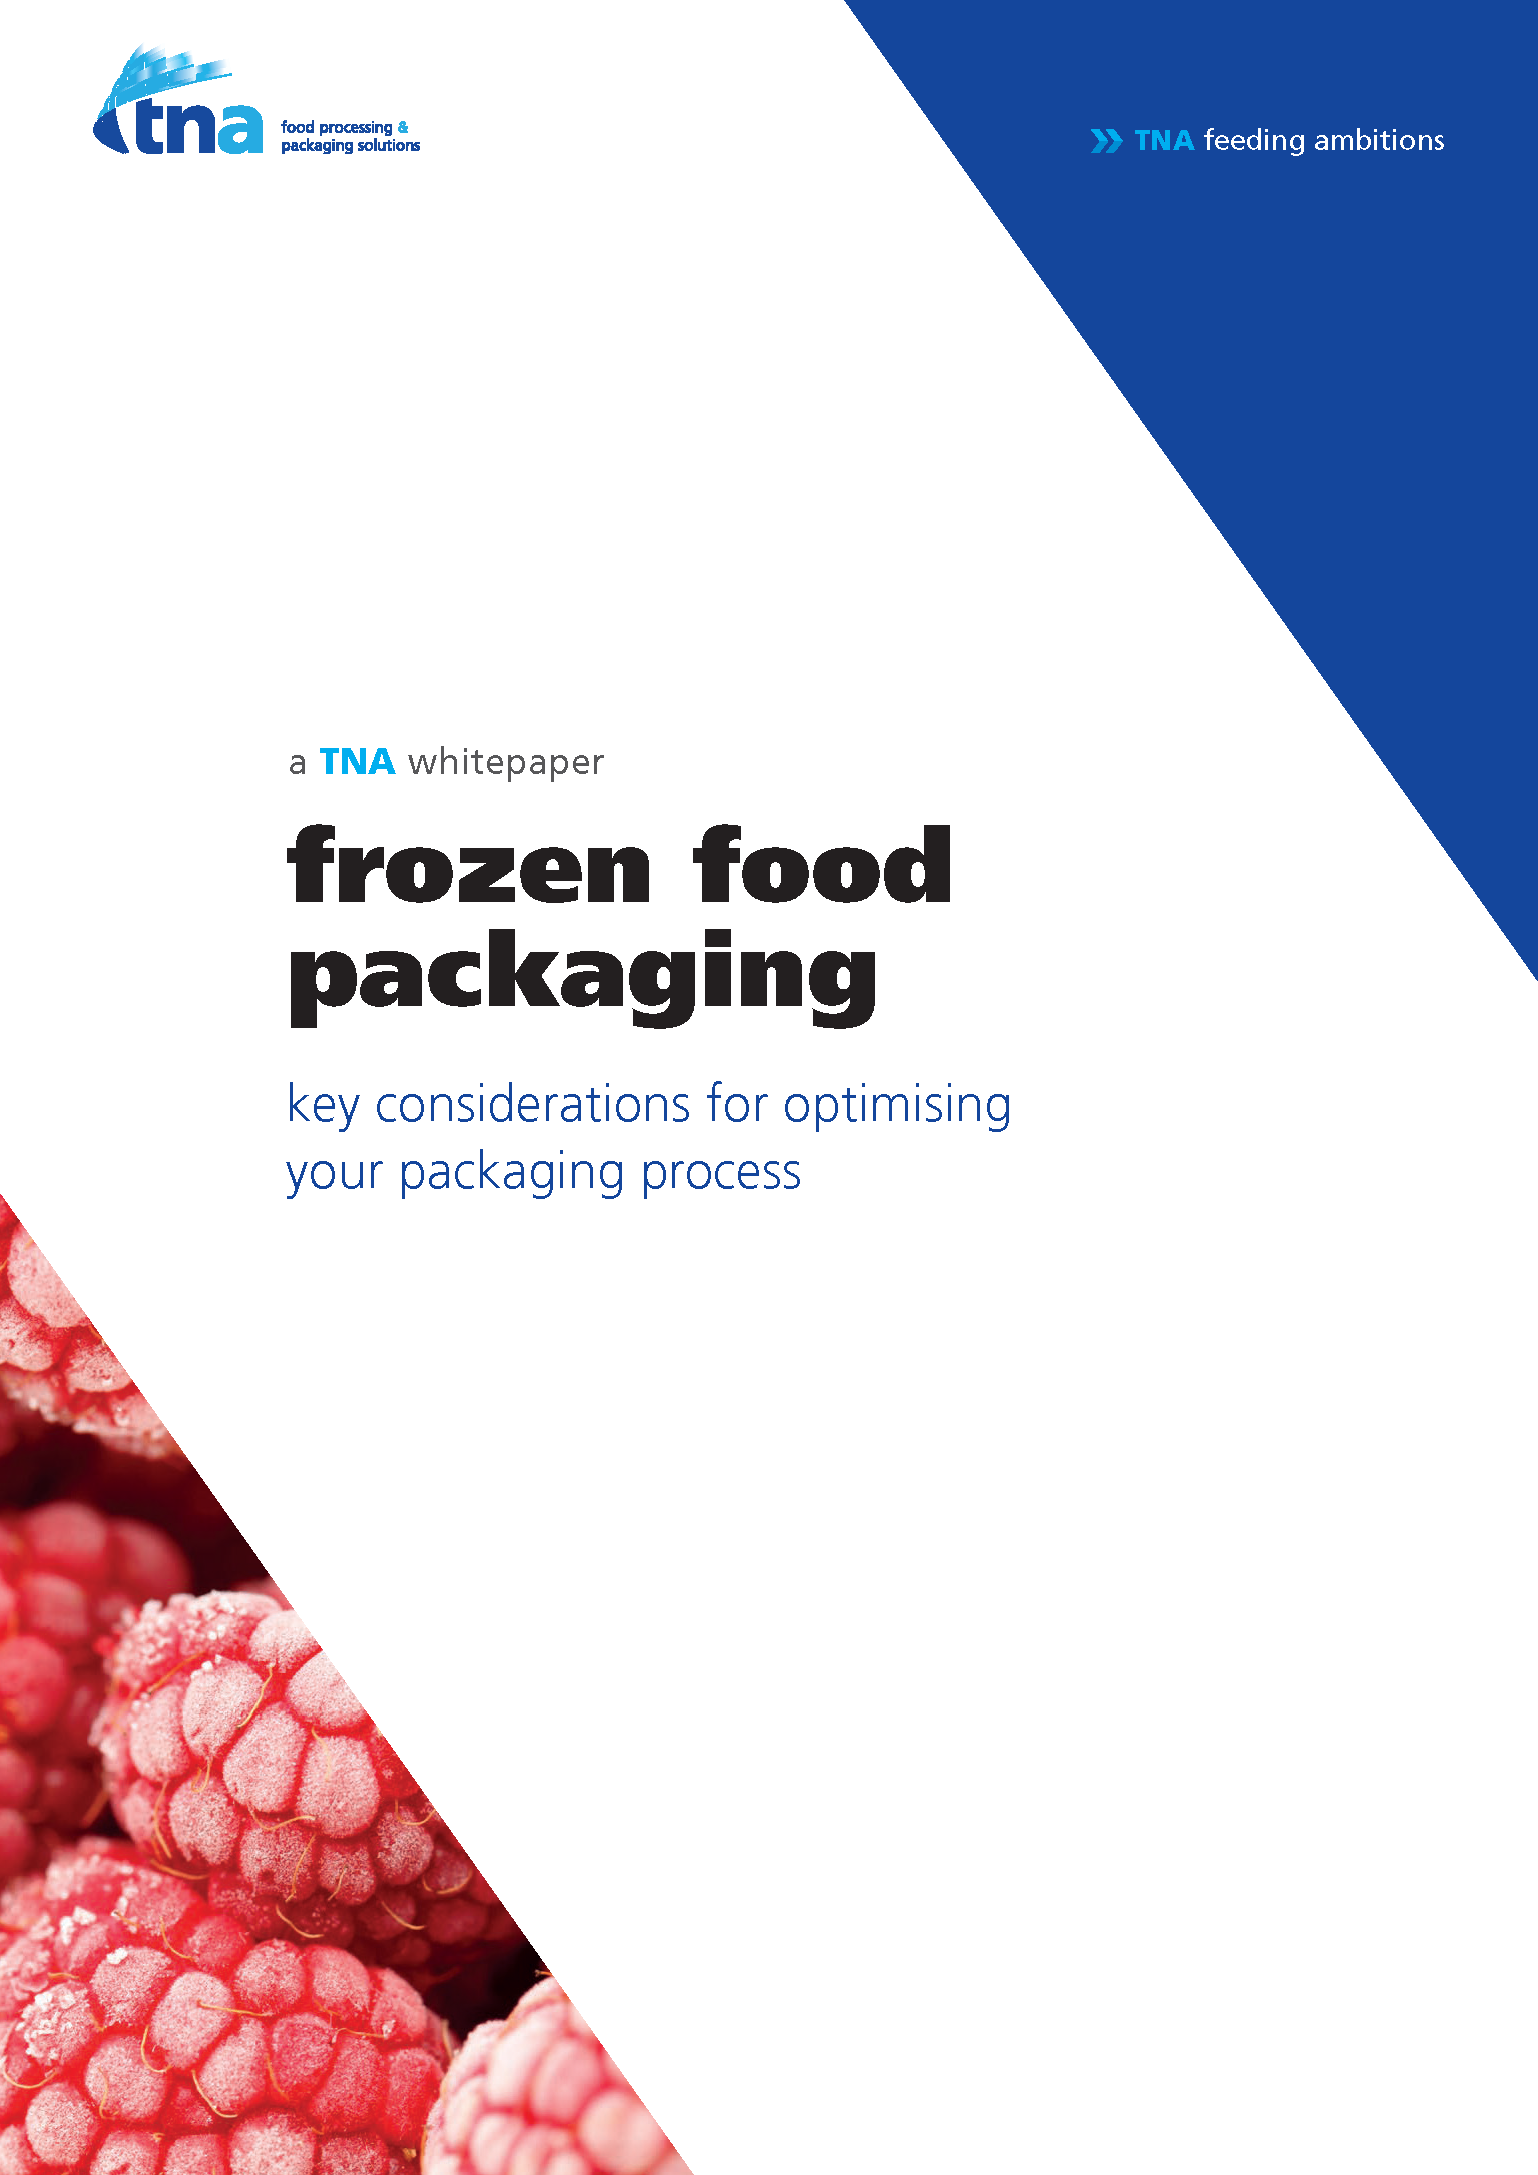 Frozen Food Packaging: Key considerations for optimising your packaging process